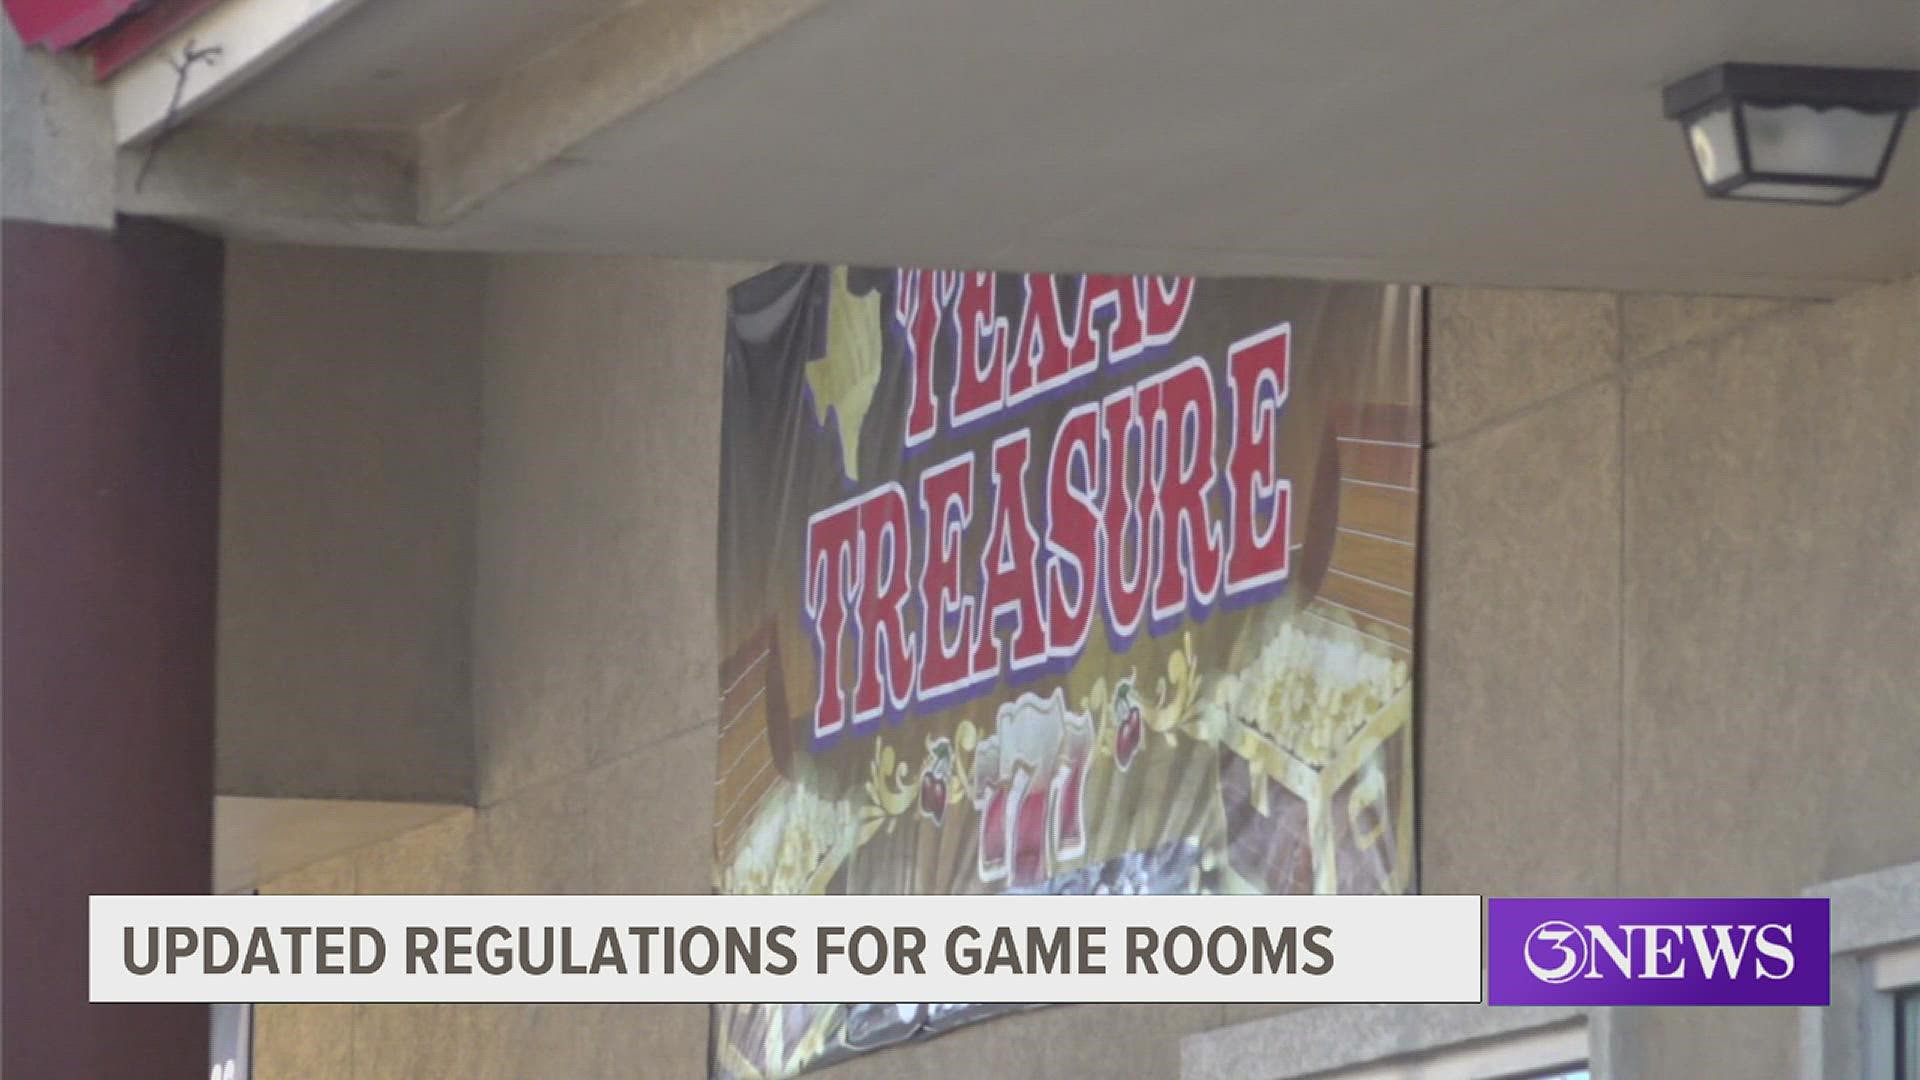 Officials say that some game room operators may choose to still not follow the rules.